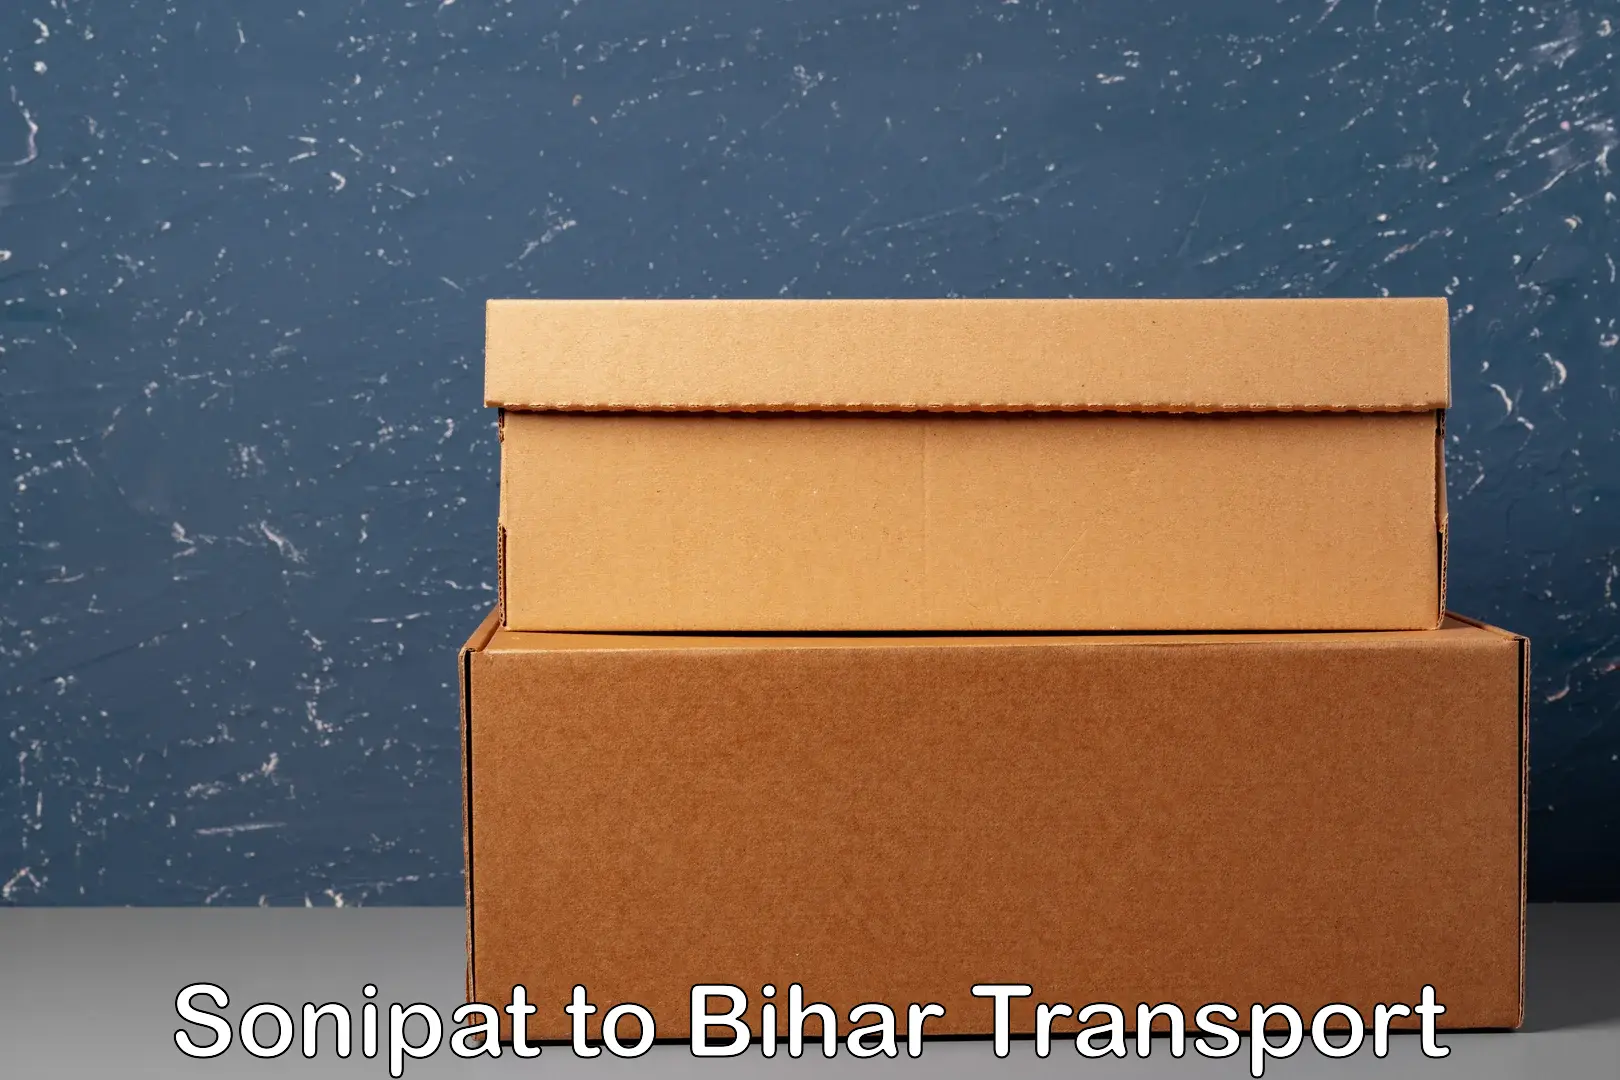 Express transport services Sonipat to Rajpur